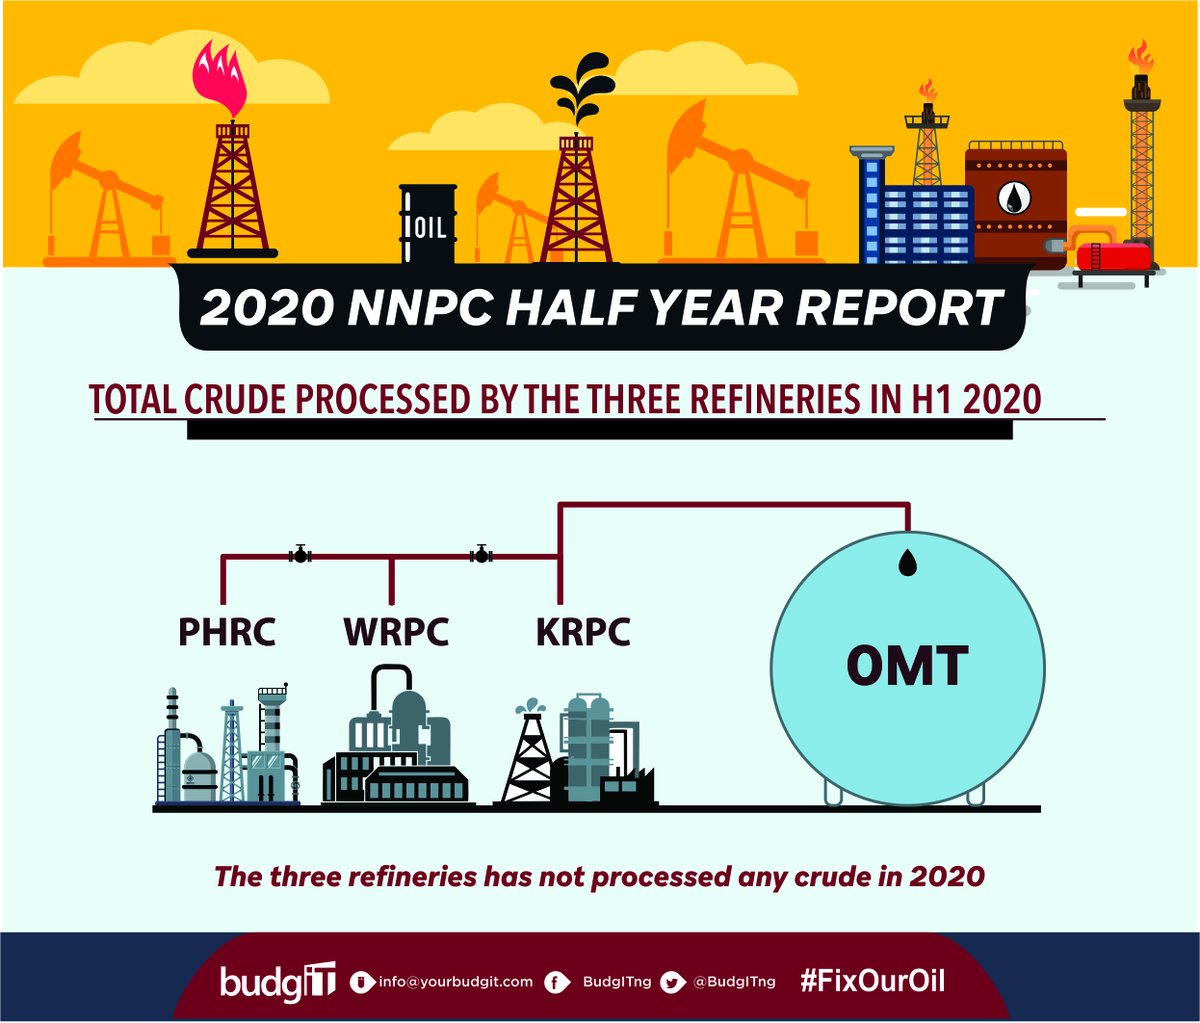 All four refineries did not process any crude oil in H1 2020.In the same period, the operating deficit recorded by the refineries was N58.73bn. #FixOurOil